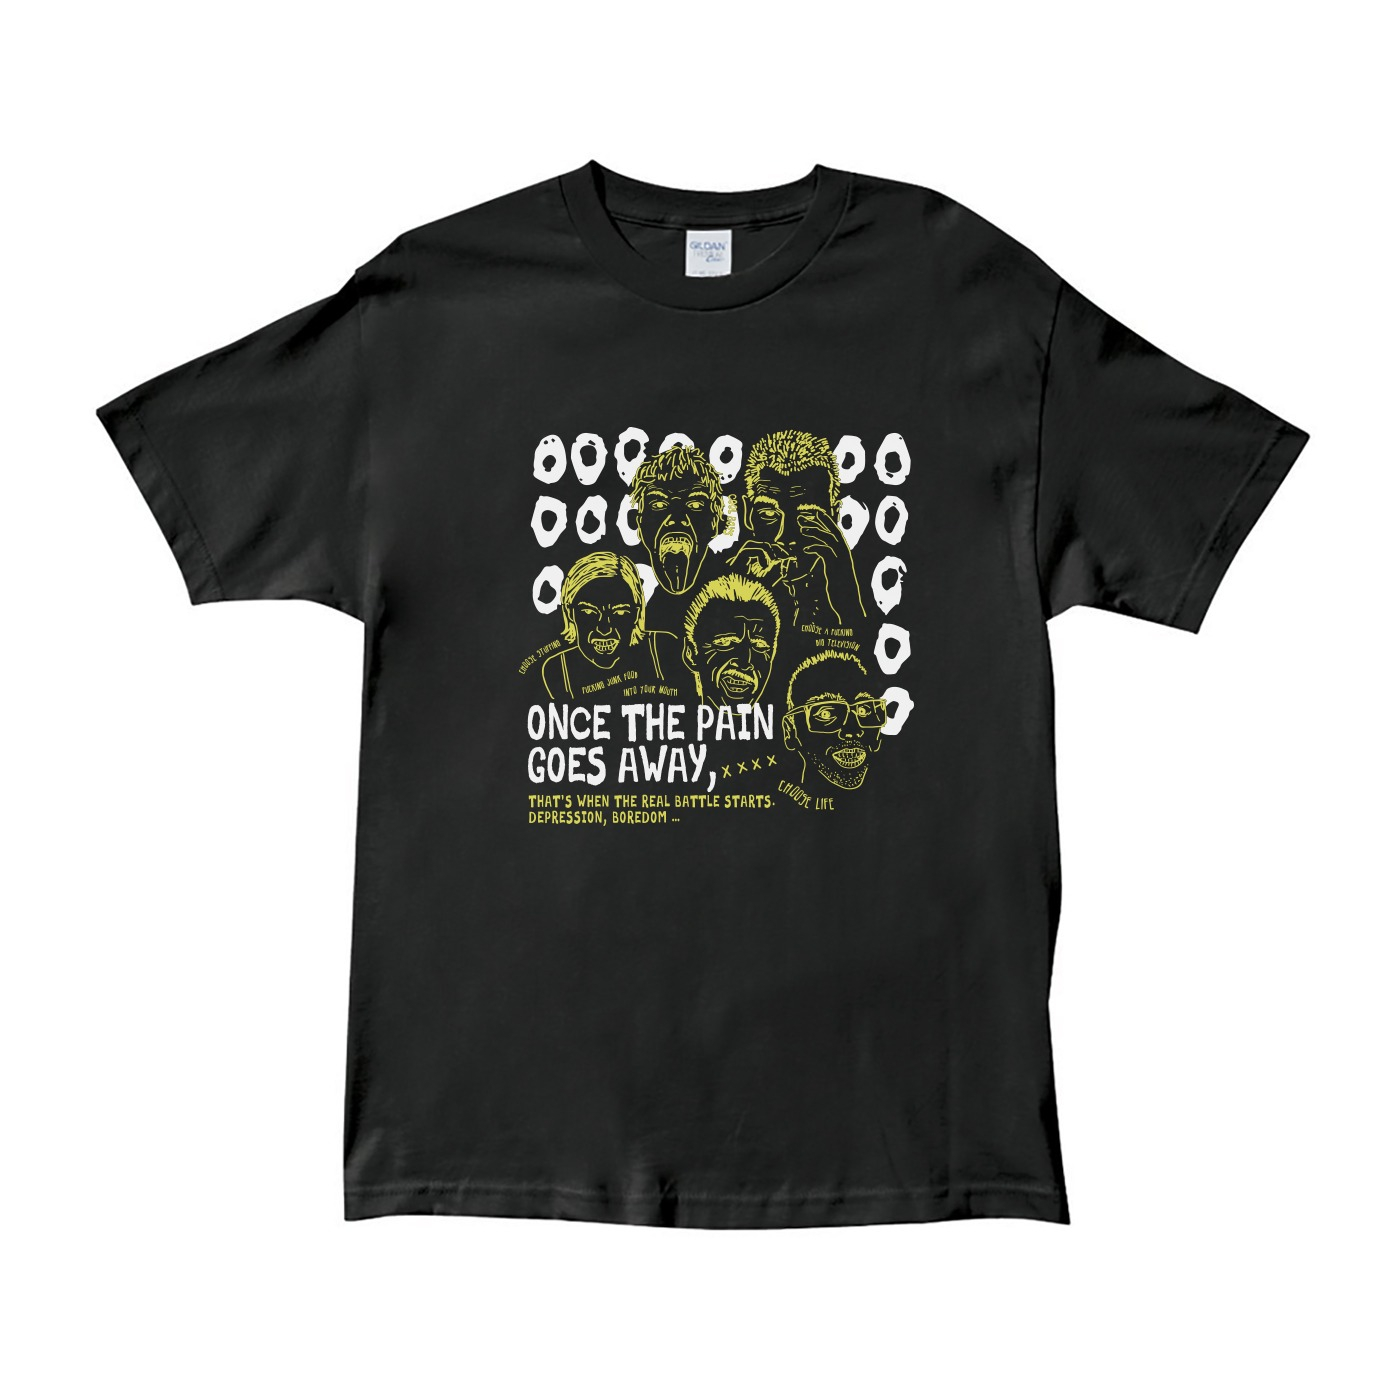 Once The Pain T-Shirt (Black)